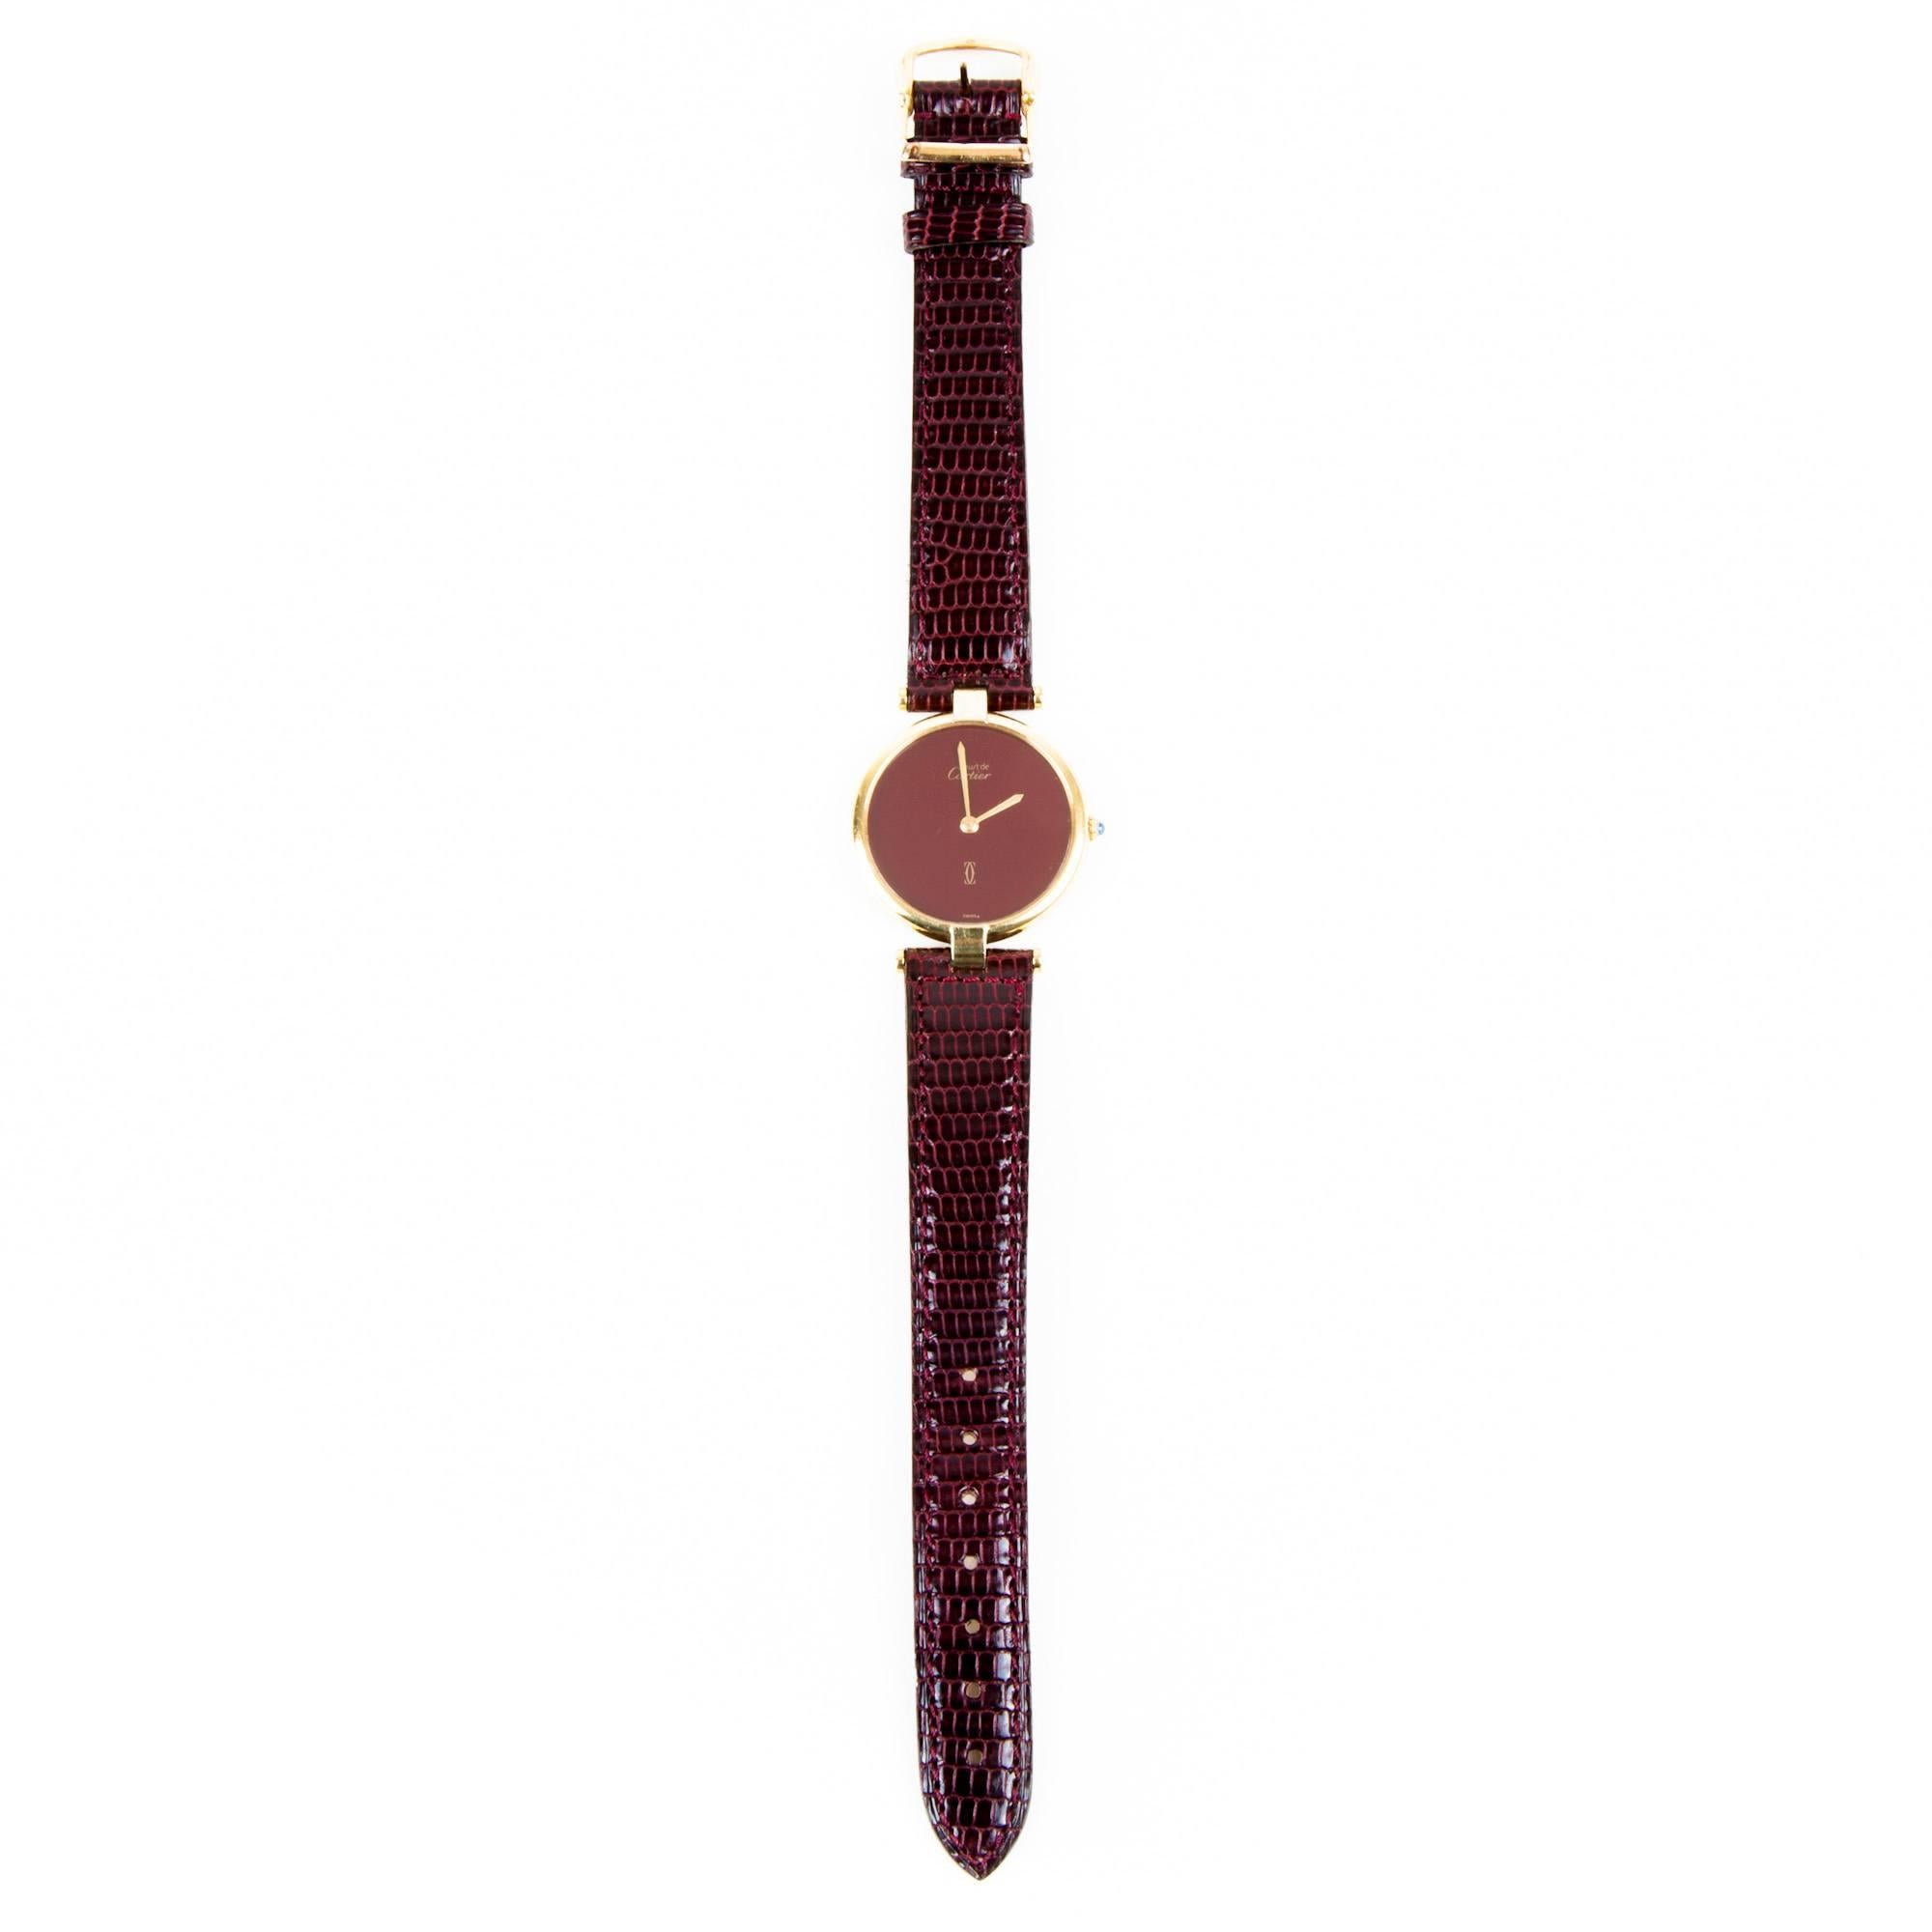 CARTIER 'Must' Watch with a Burgundy Dial and Leather Strap